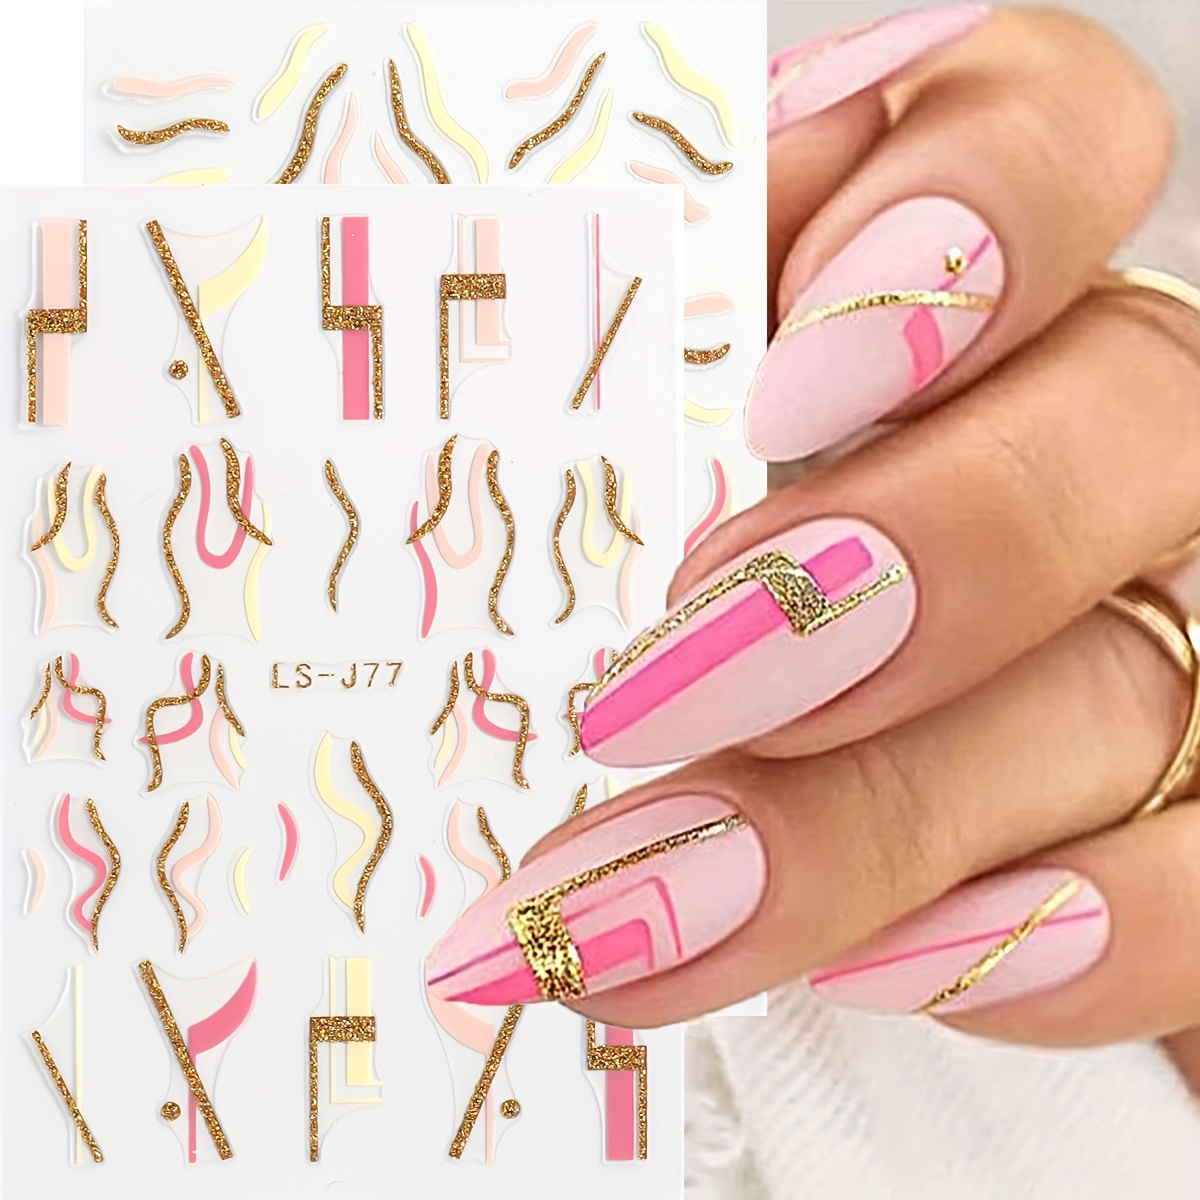 

2 Sheets Golden Glitter French Lines Nail Stickers - Curve Wave Swirls, Pink Stripes, And Sliders - Art Manicure Decoration For A Chic And Elegant Look